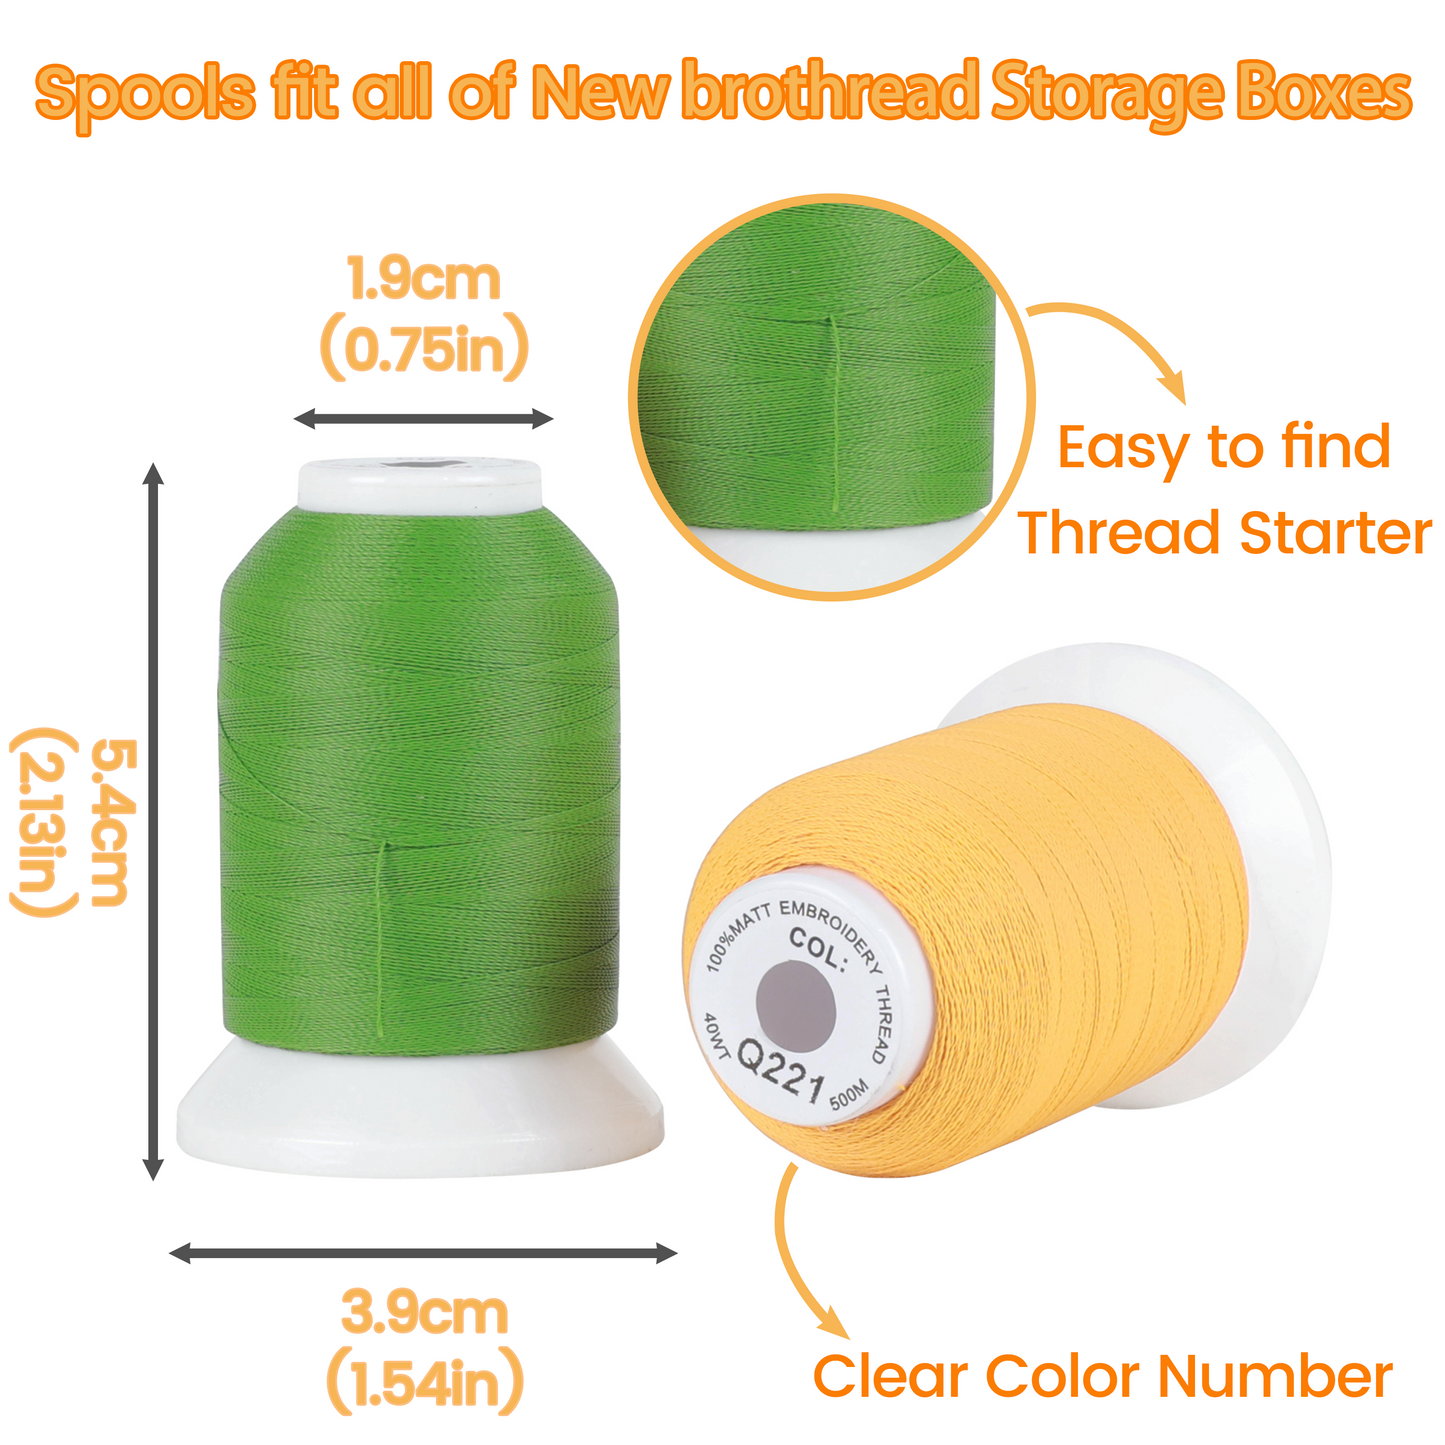 100% Frosted Matt Embroidery Machine Thread 52 Spools 40WT Each Spool 500M (550Y) for Brother Babylock Janome Singer Pfaff Husqvarna Bernina Embroidery and Sewing Machines-Made by New brothread